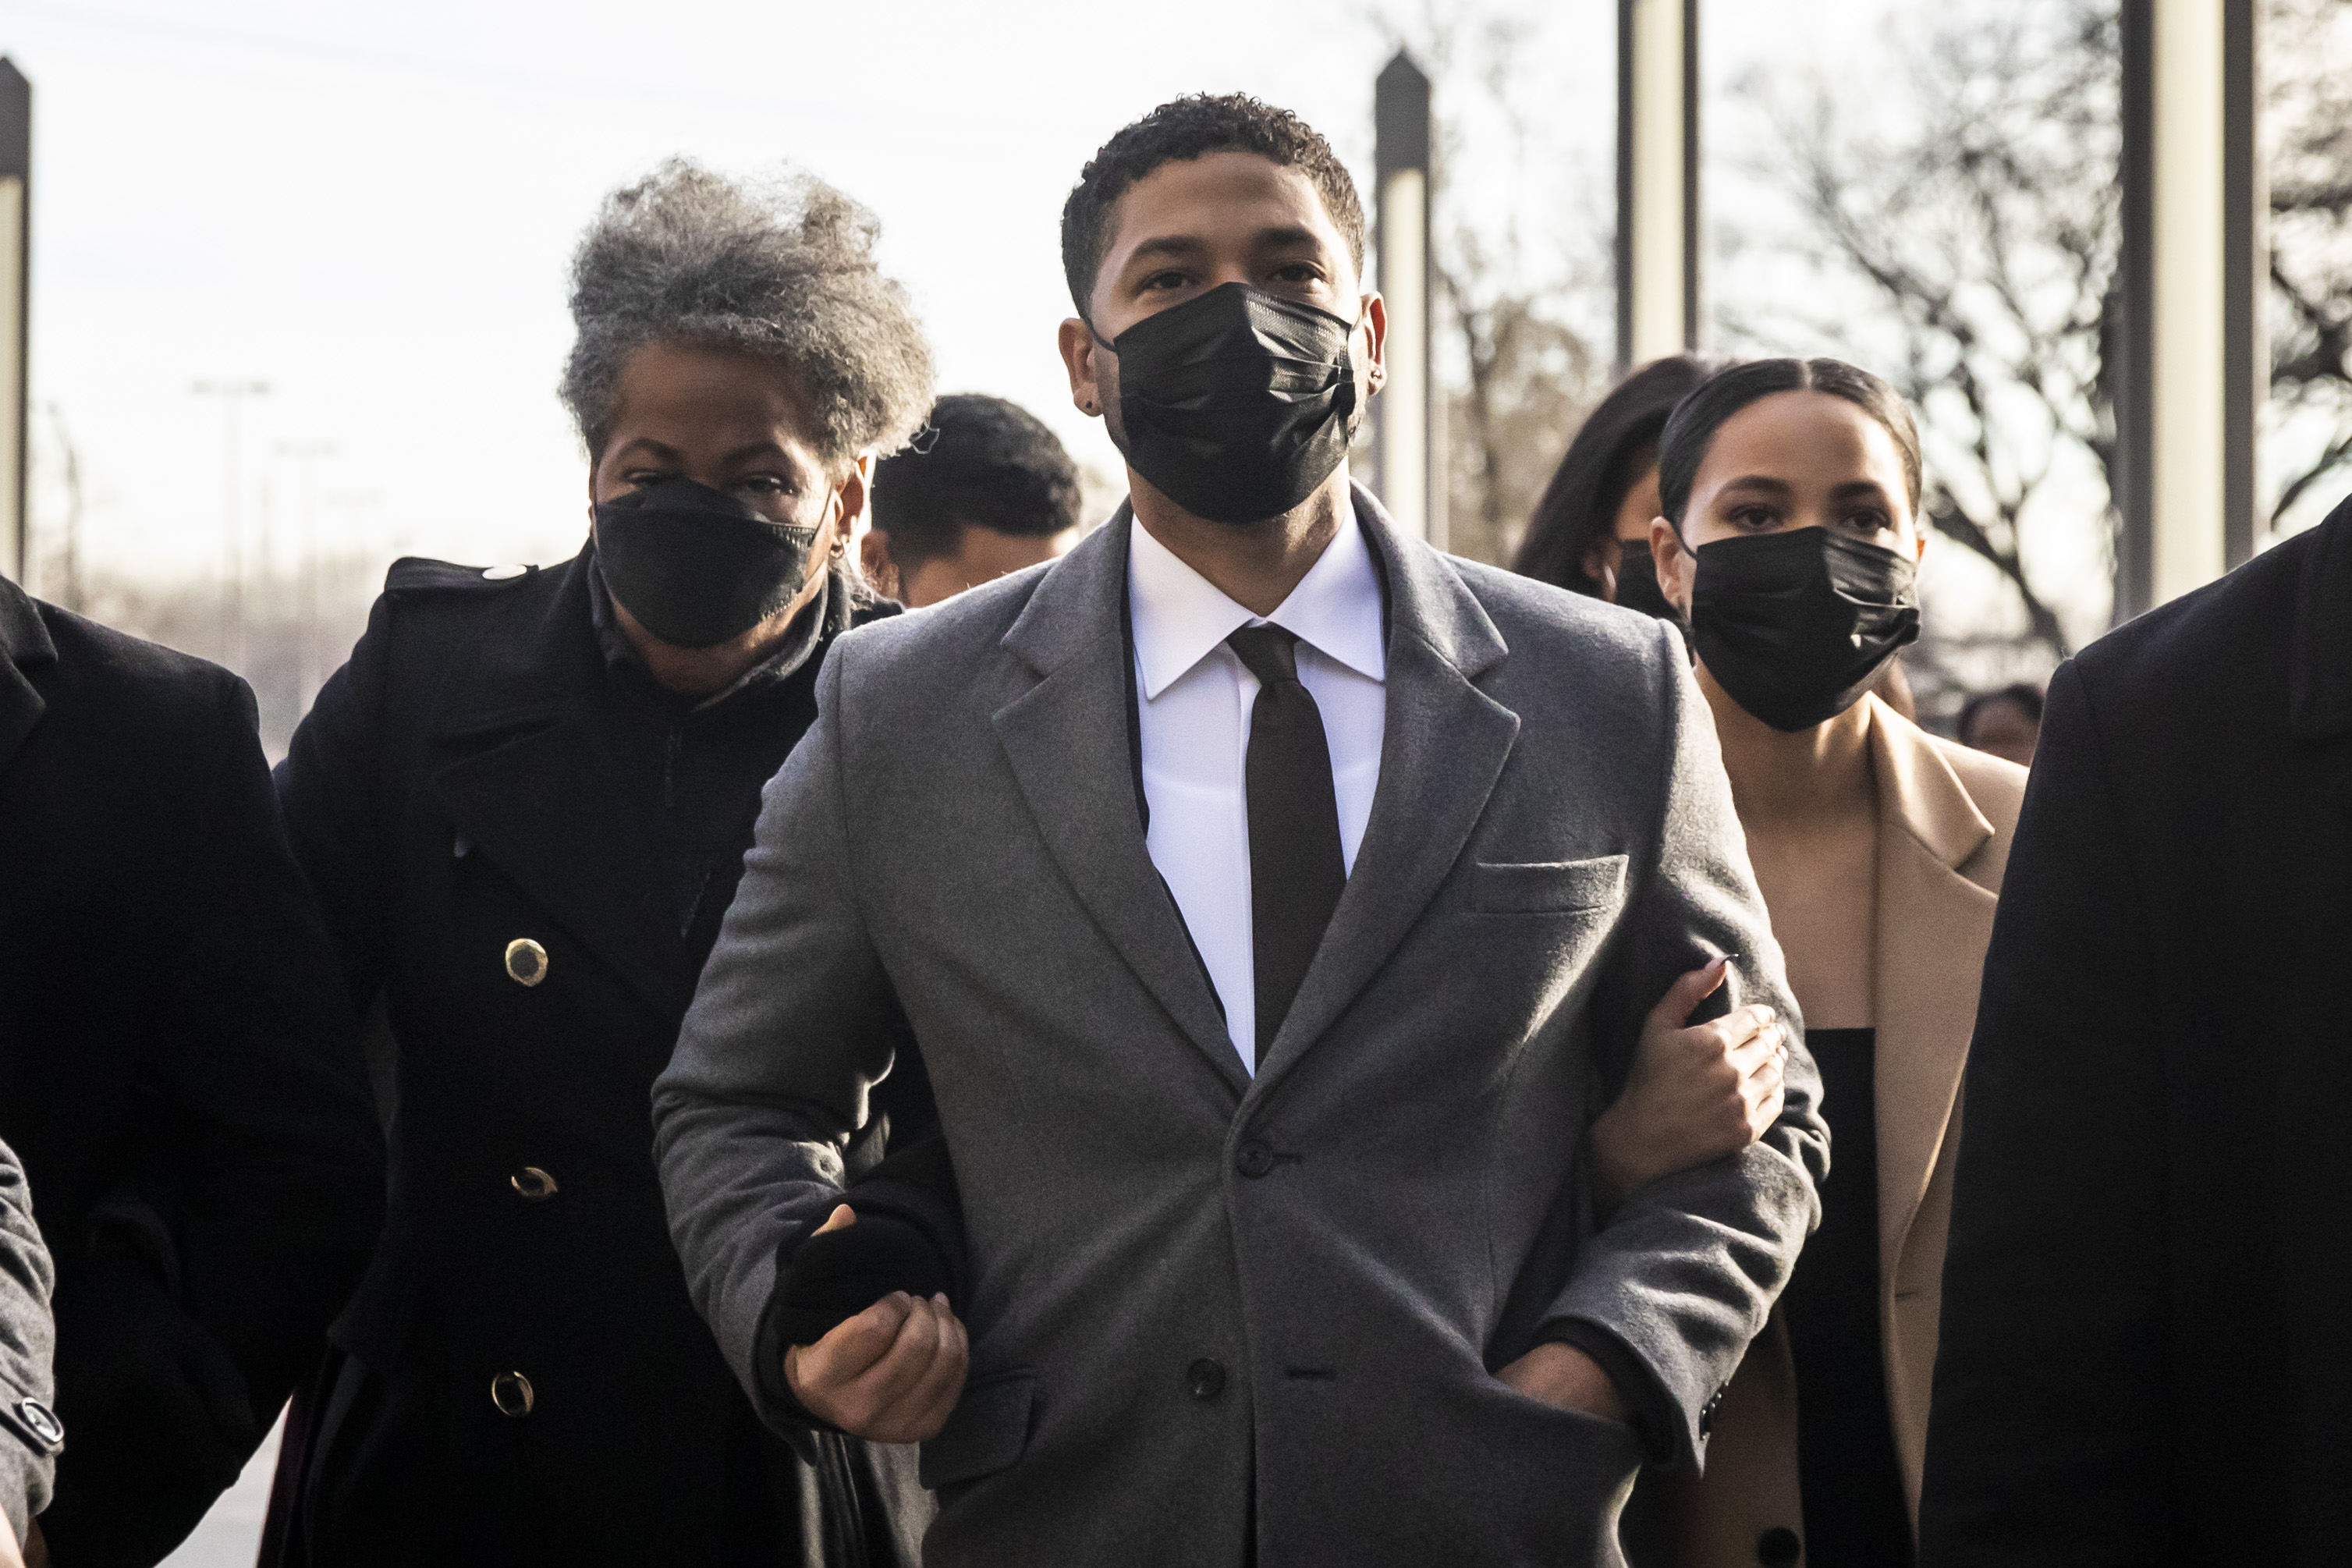 With his mother, Janet Smollett, on his right arm and sister, Jurnee Smollett, on his left arm, former “Empire” star Jussie Smollett walks behind bodyguards into the Leighton Criminal Courthouse, Thursday morning.